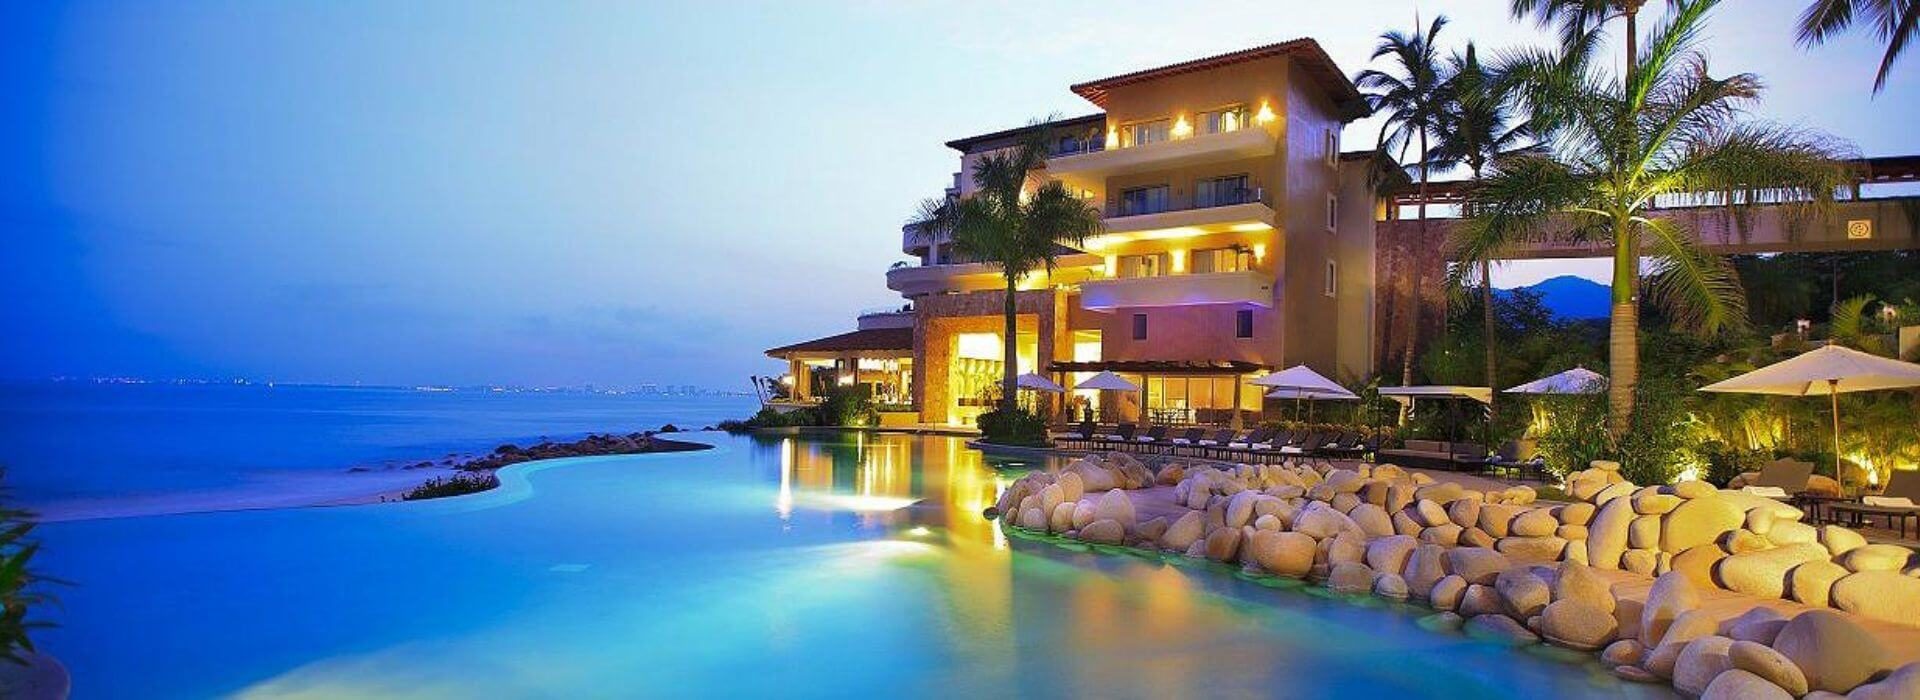 A multi story villa with a pool at the bottom and the ocean in the background